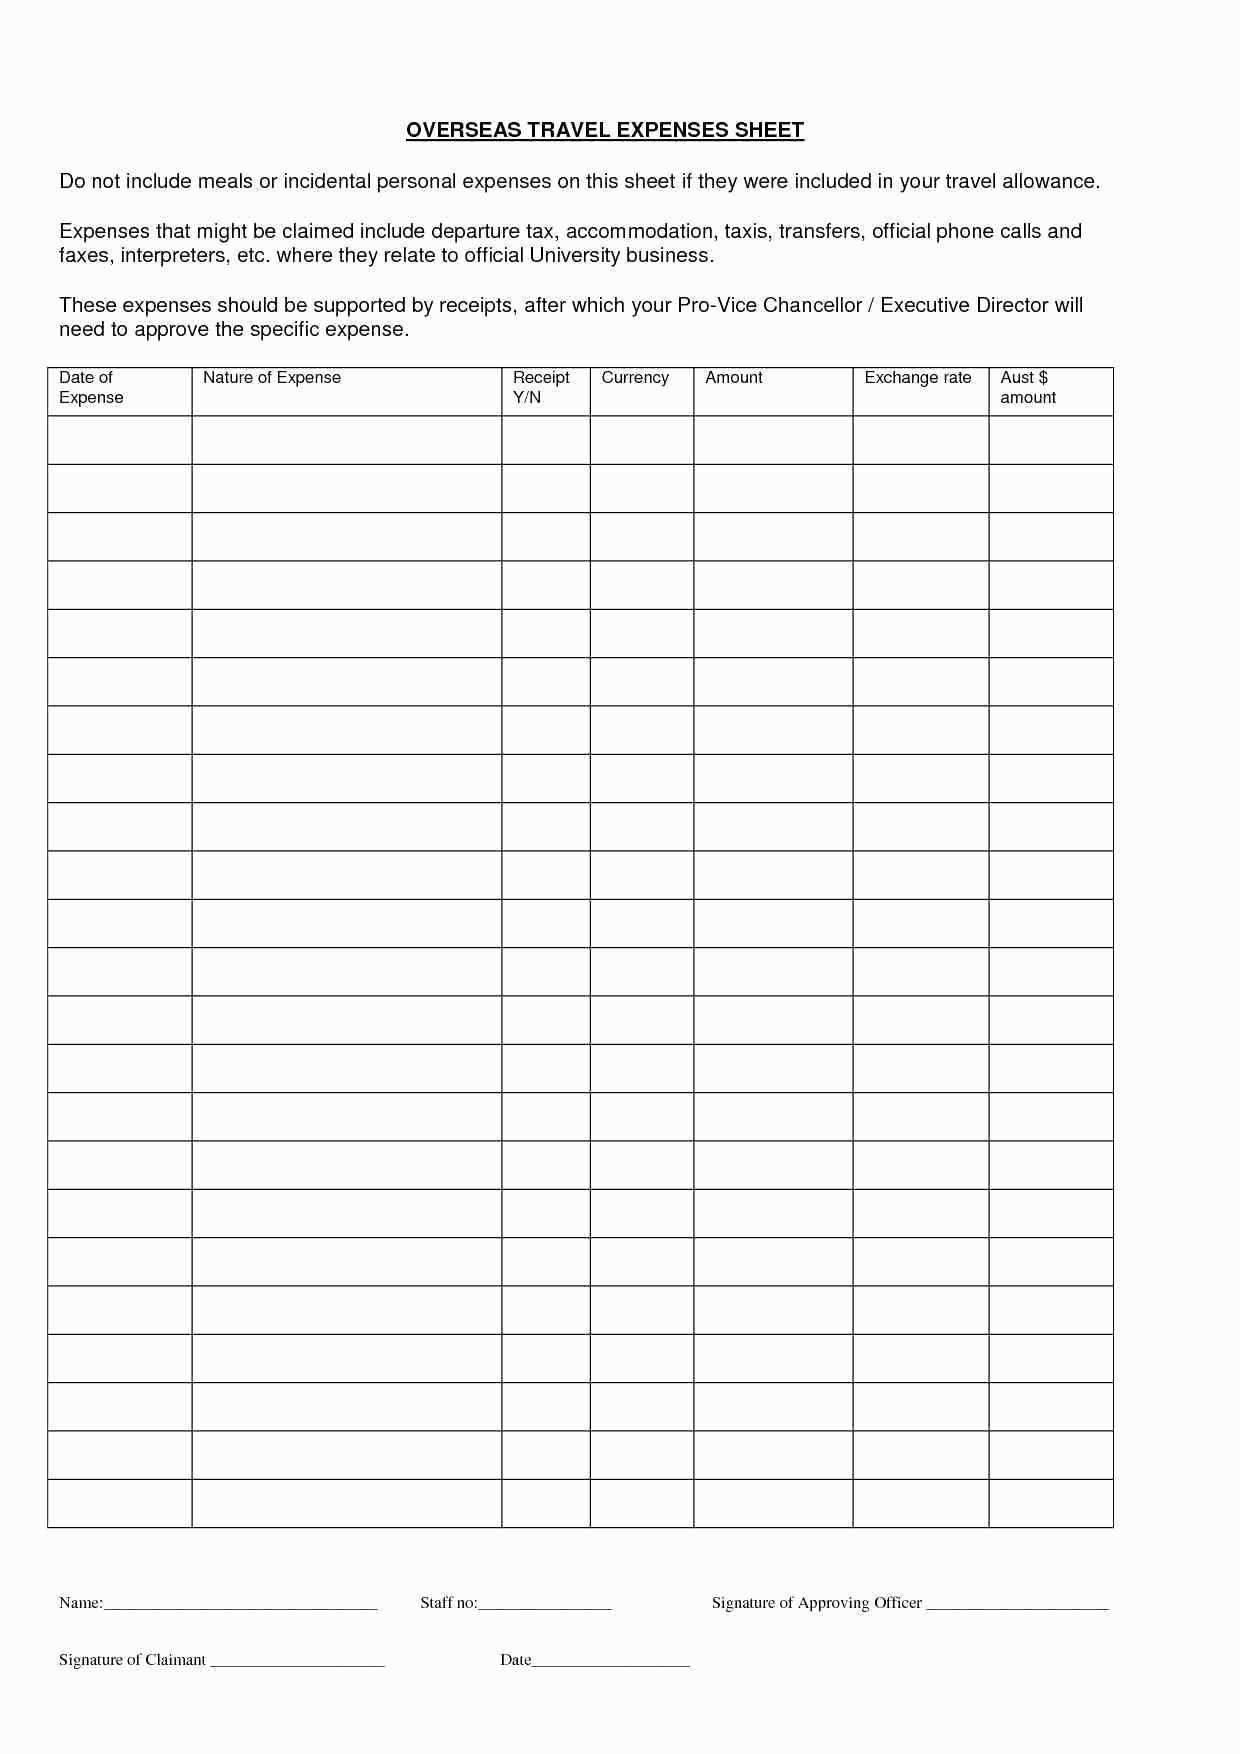 Home Inventory Worksheet with Home Inventory Spreadsheet Best 14 Awesome Insurance Spreadsheet